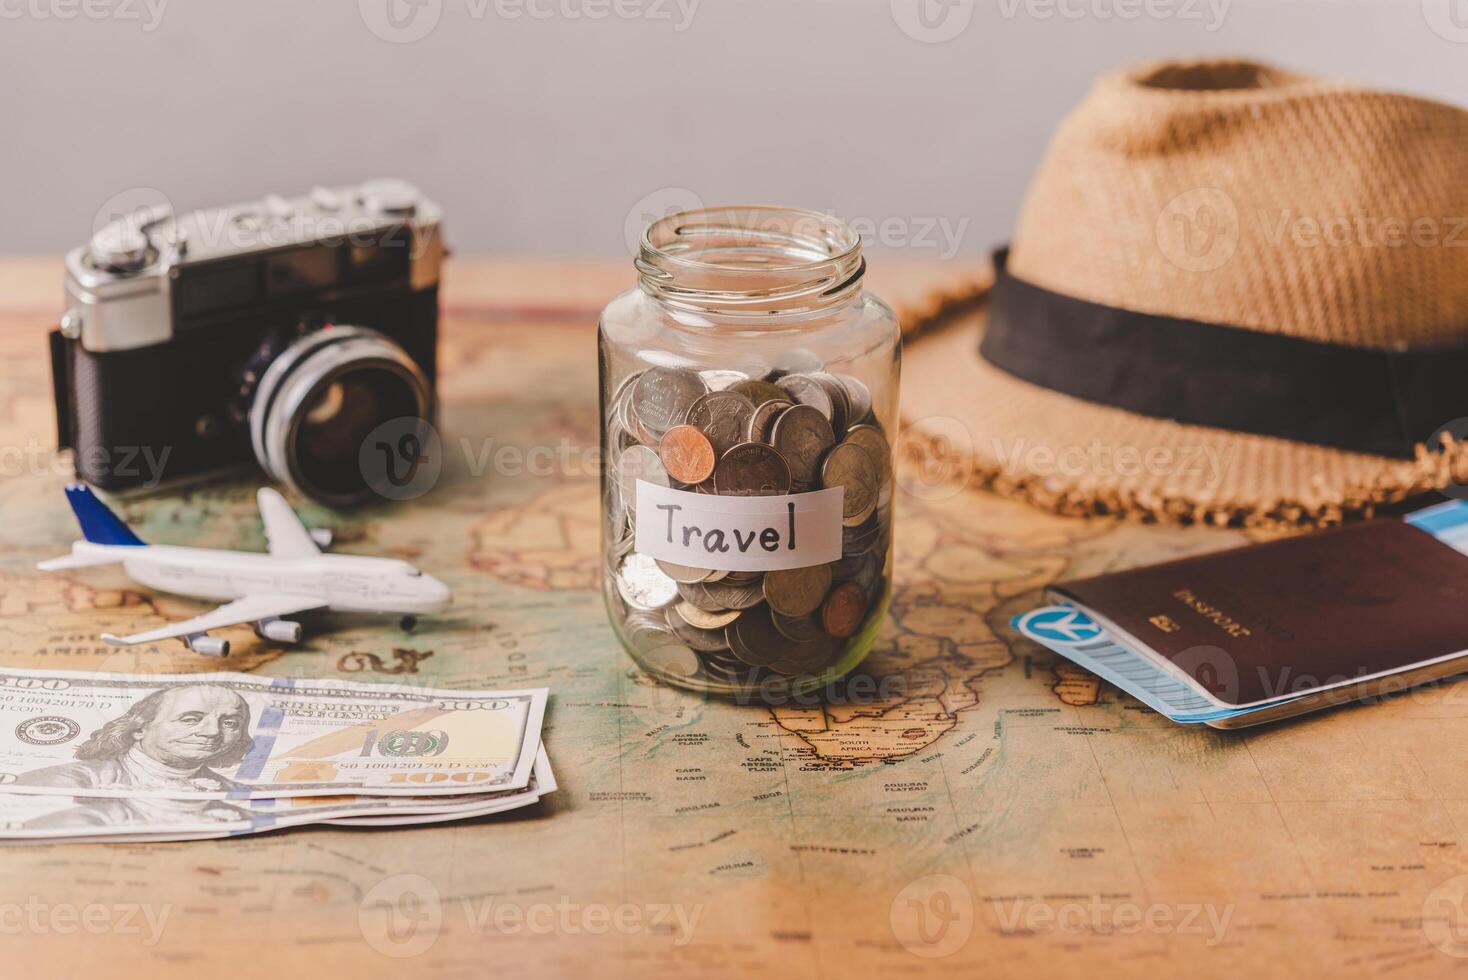 The money in the jar stored on the map, along with a passport, concept to collect money for travel. photo